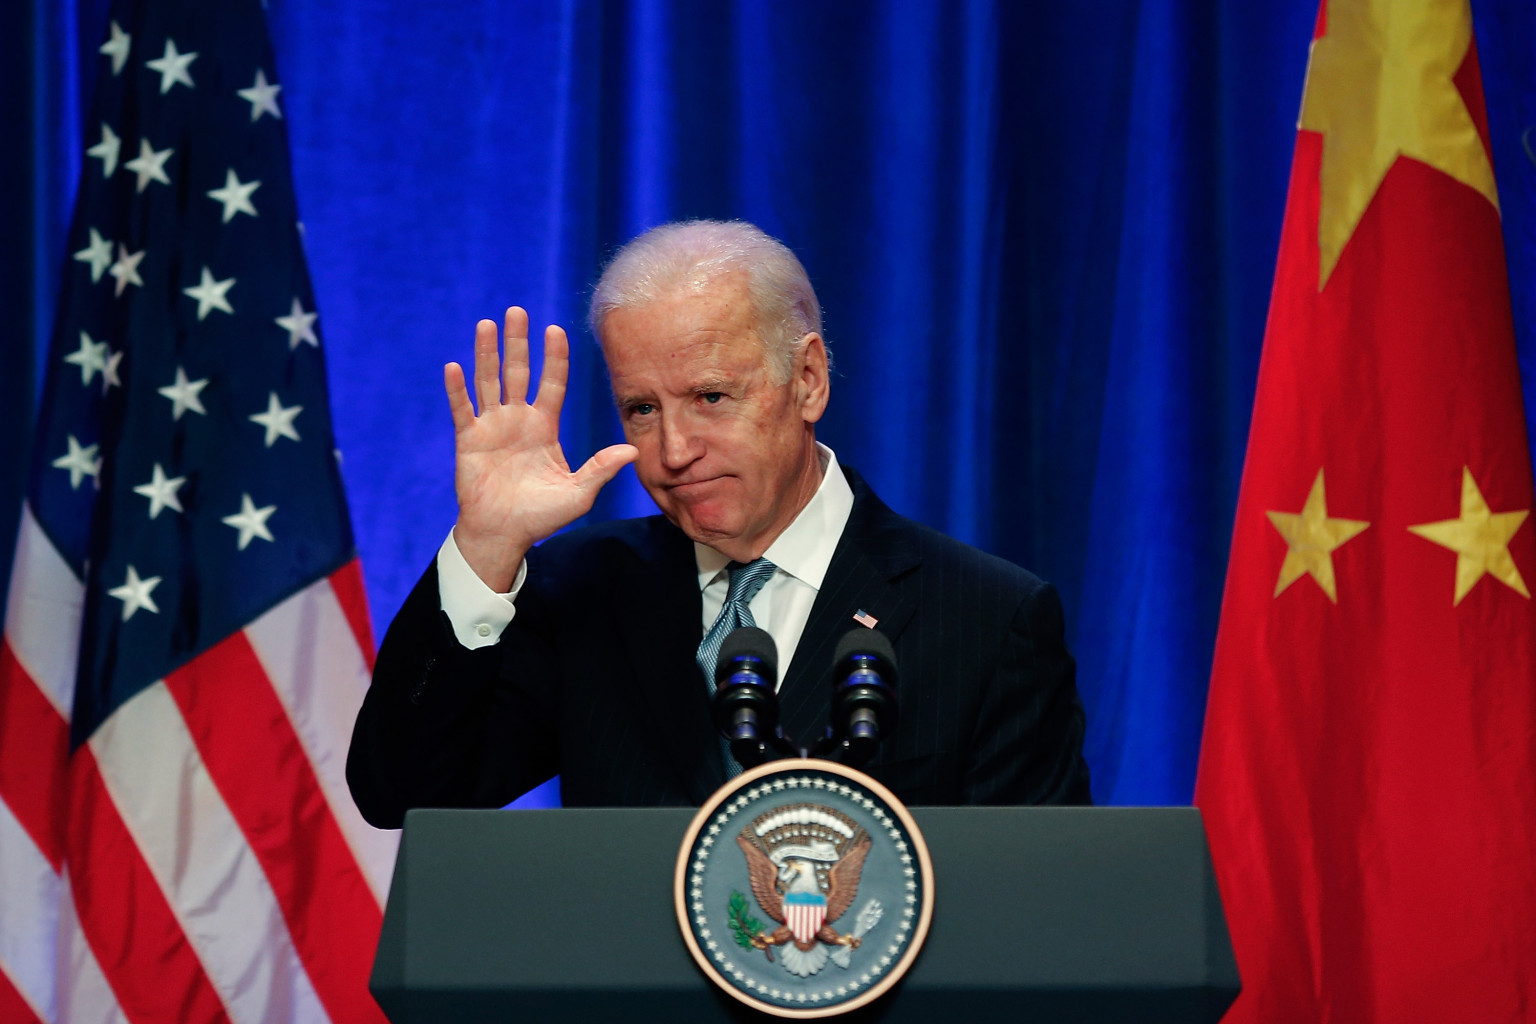 Biden Thinks He’s Tough on China. He’s Just Complacent.